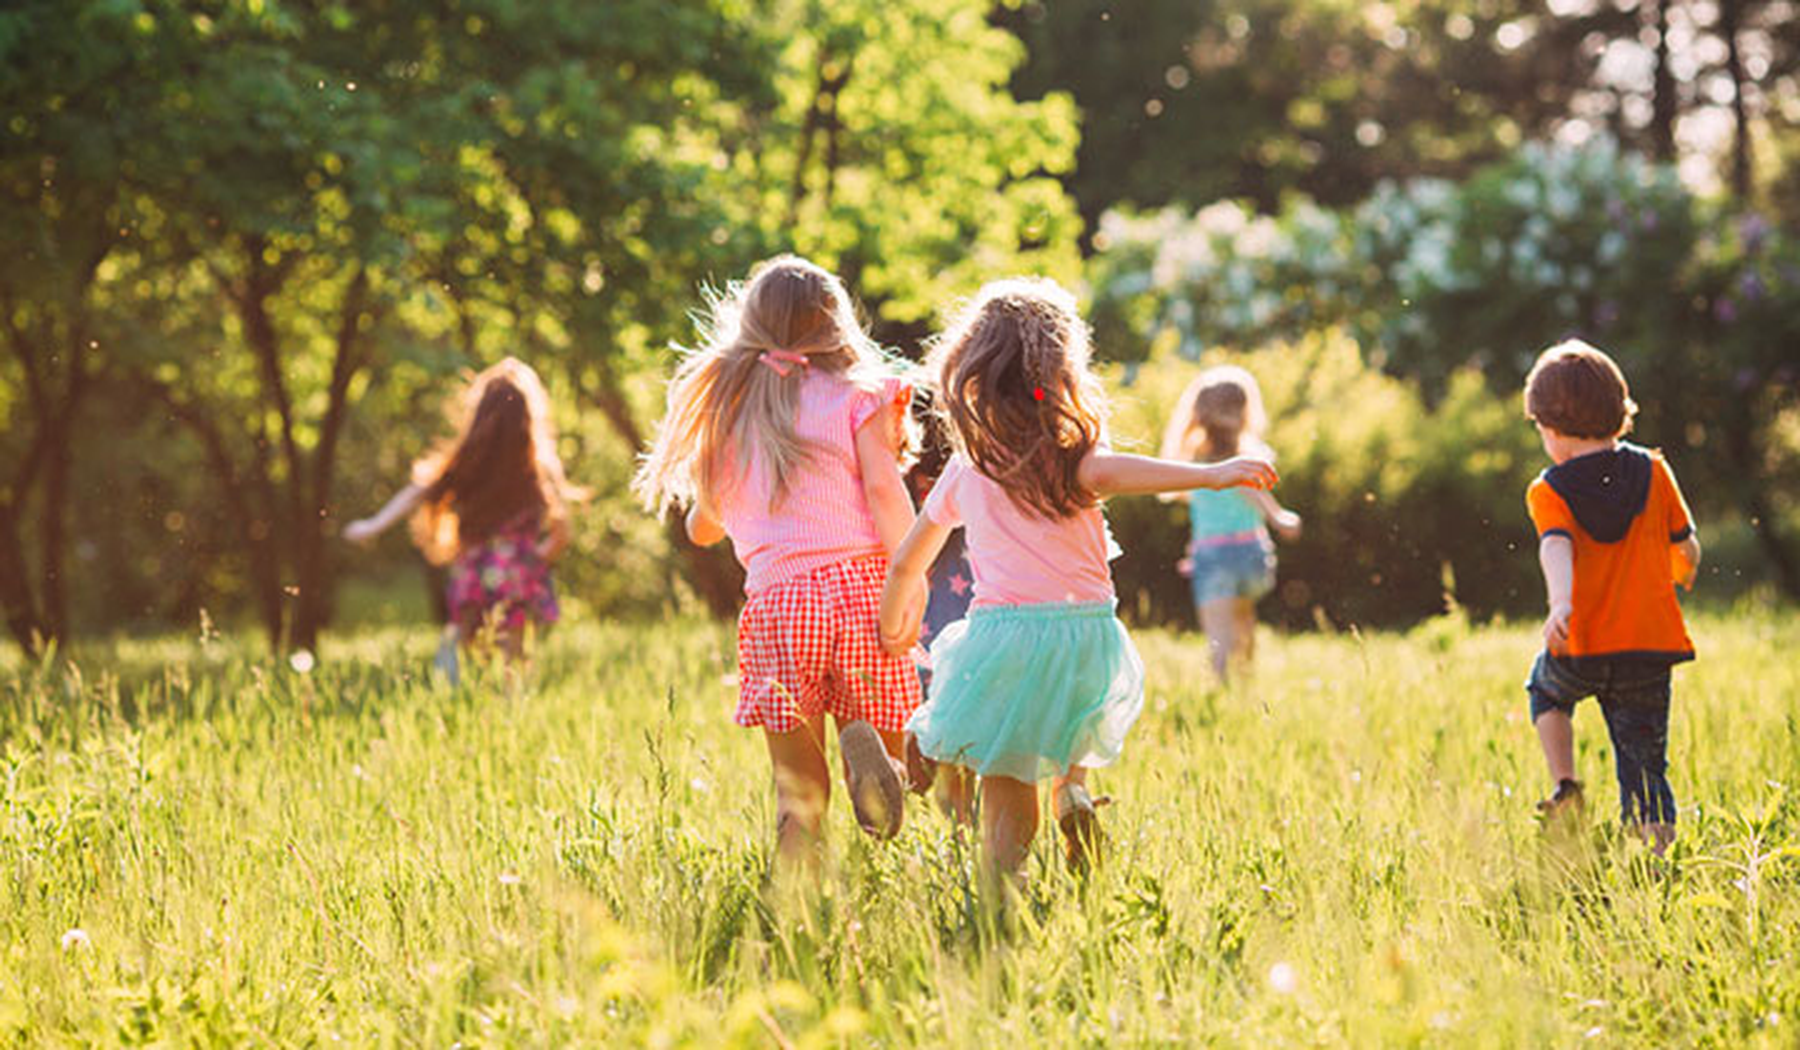 Young kids running through a sunny field